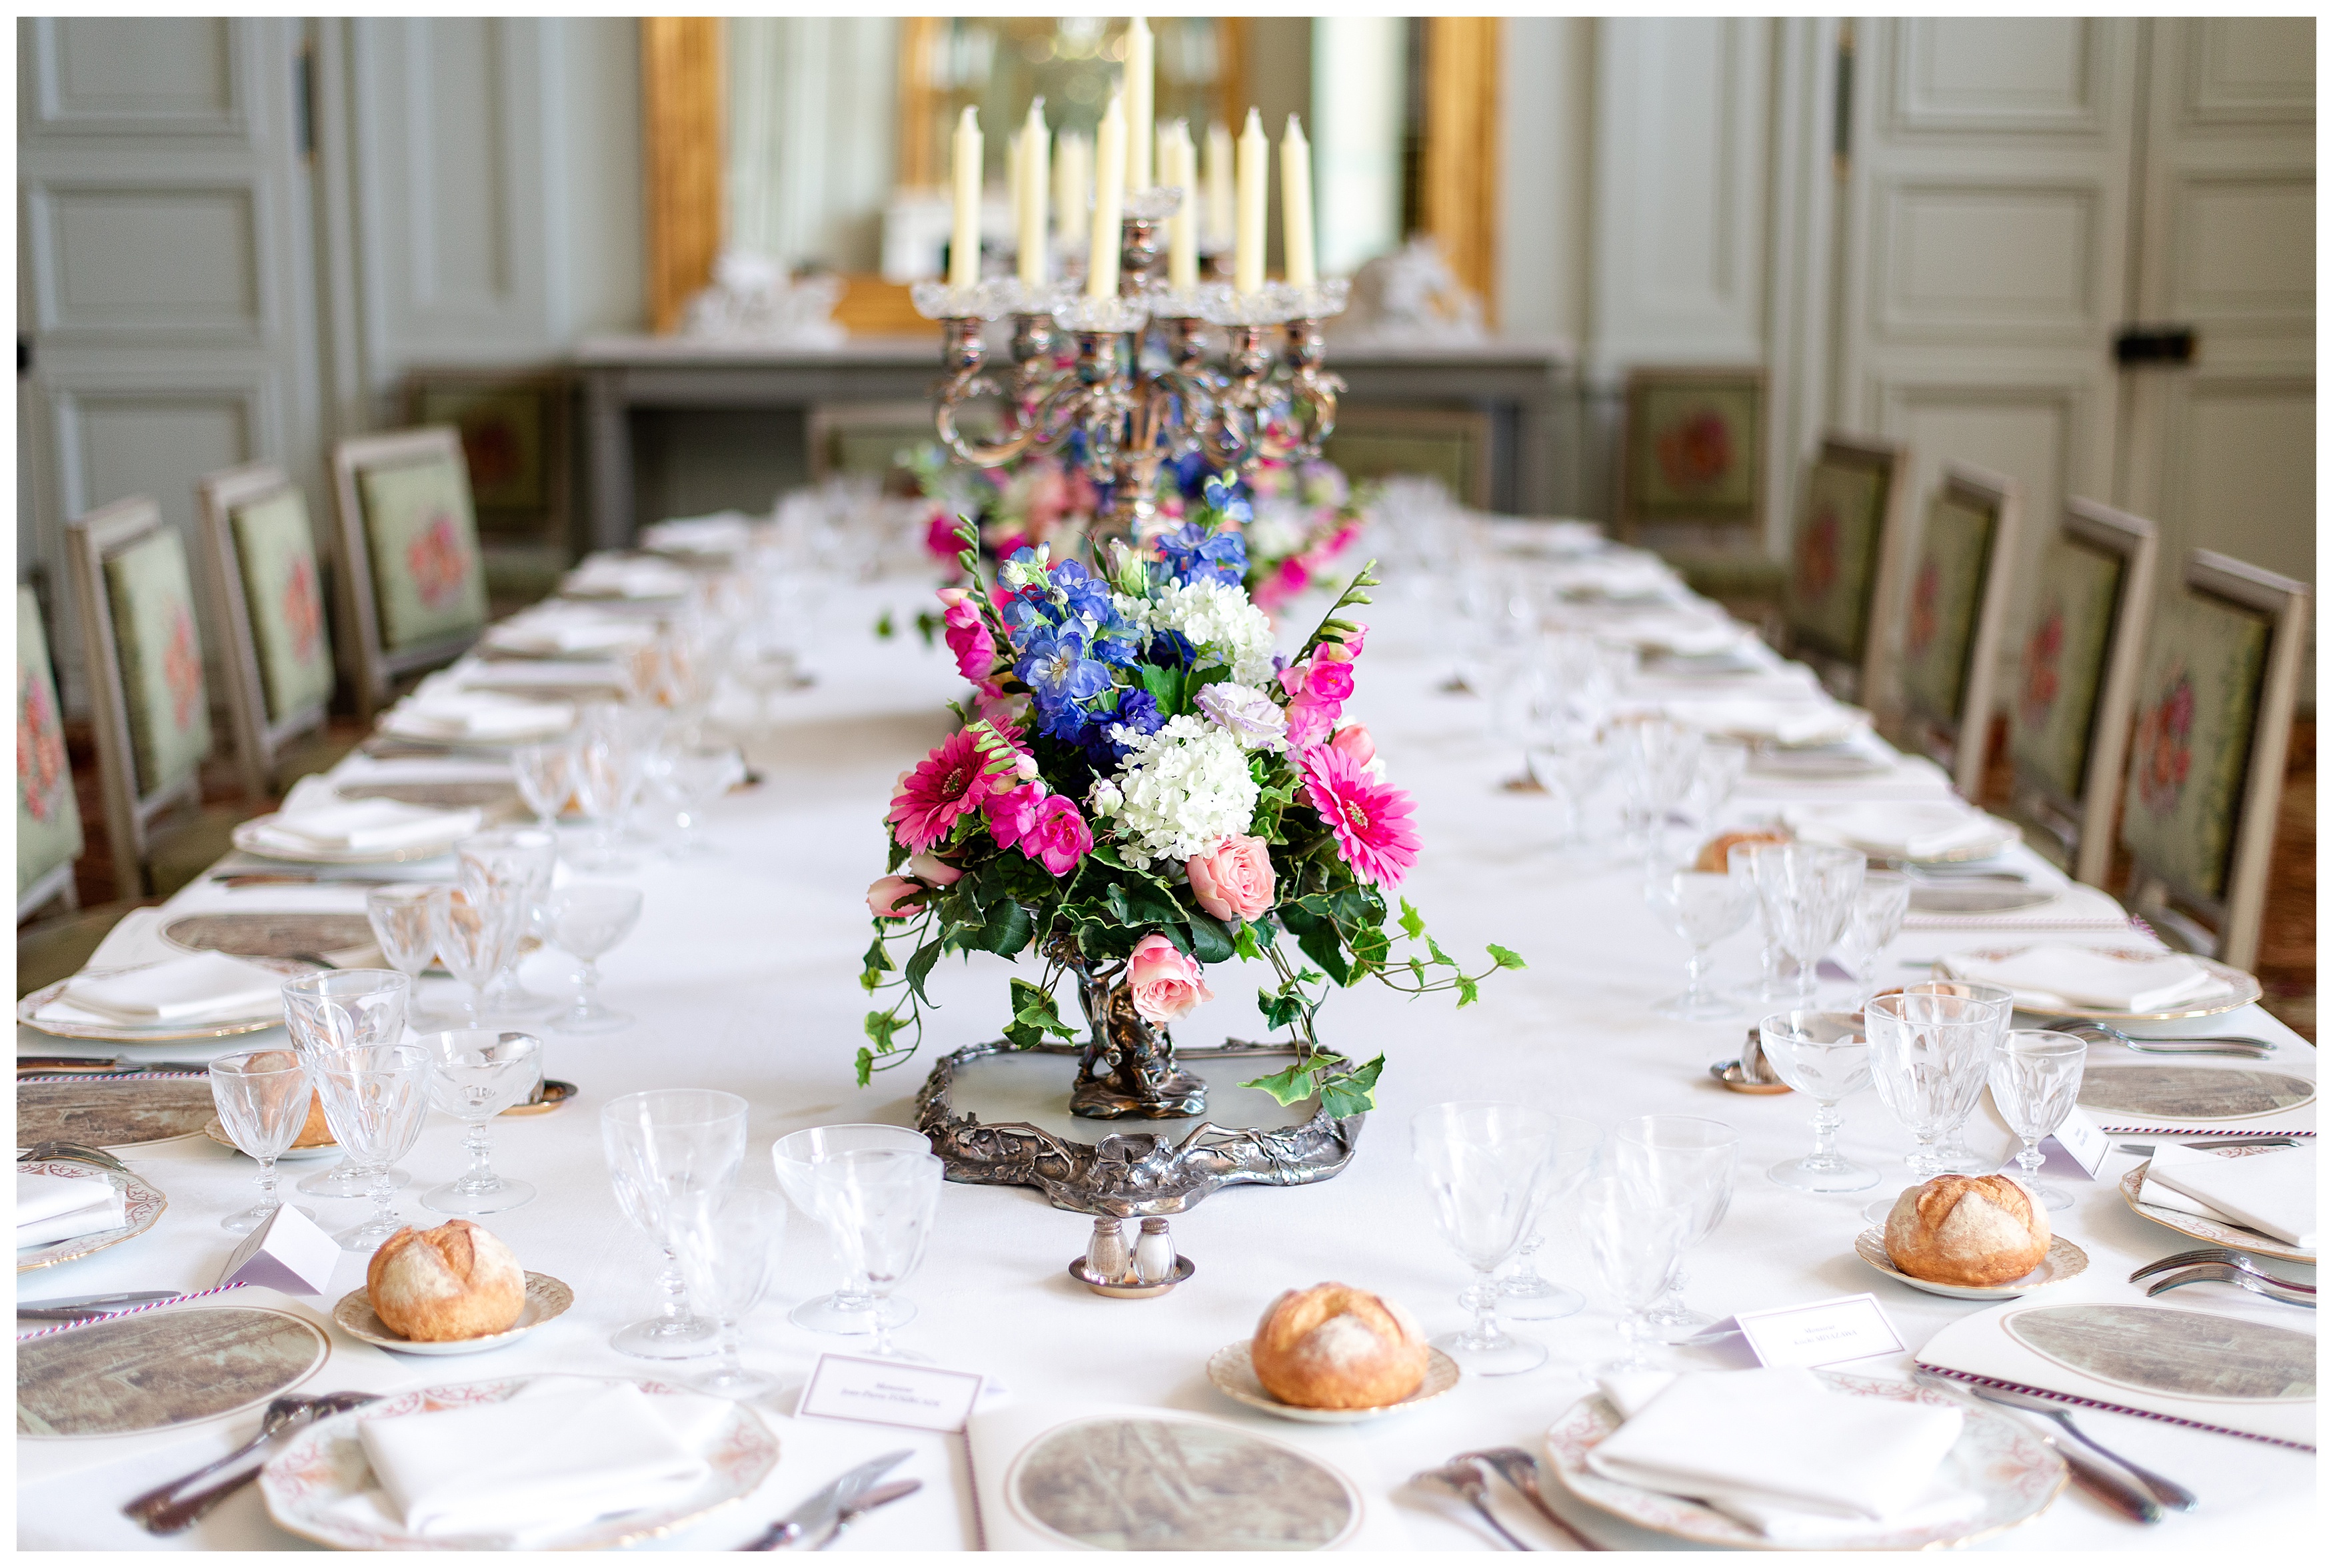 the formal dining room in the château in rambouillet, france